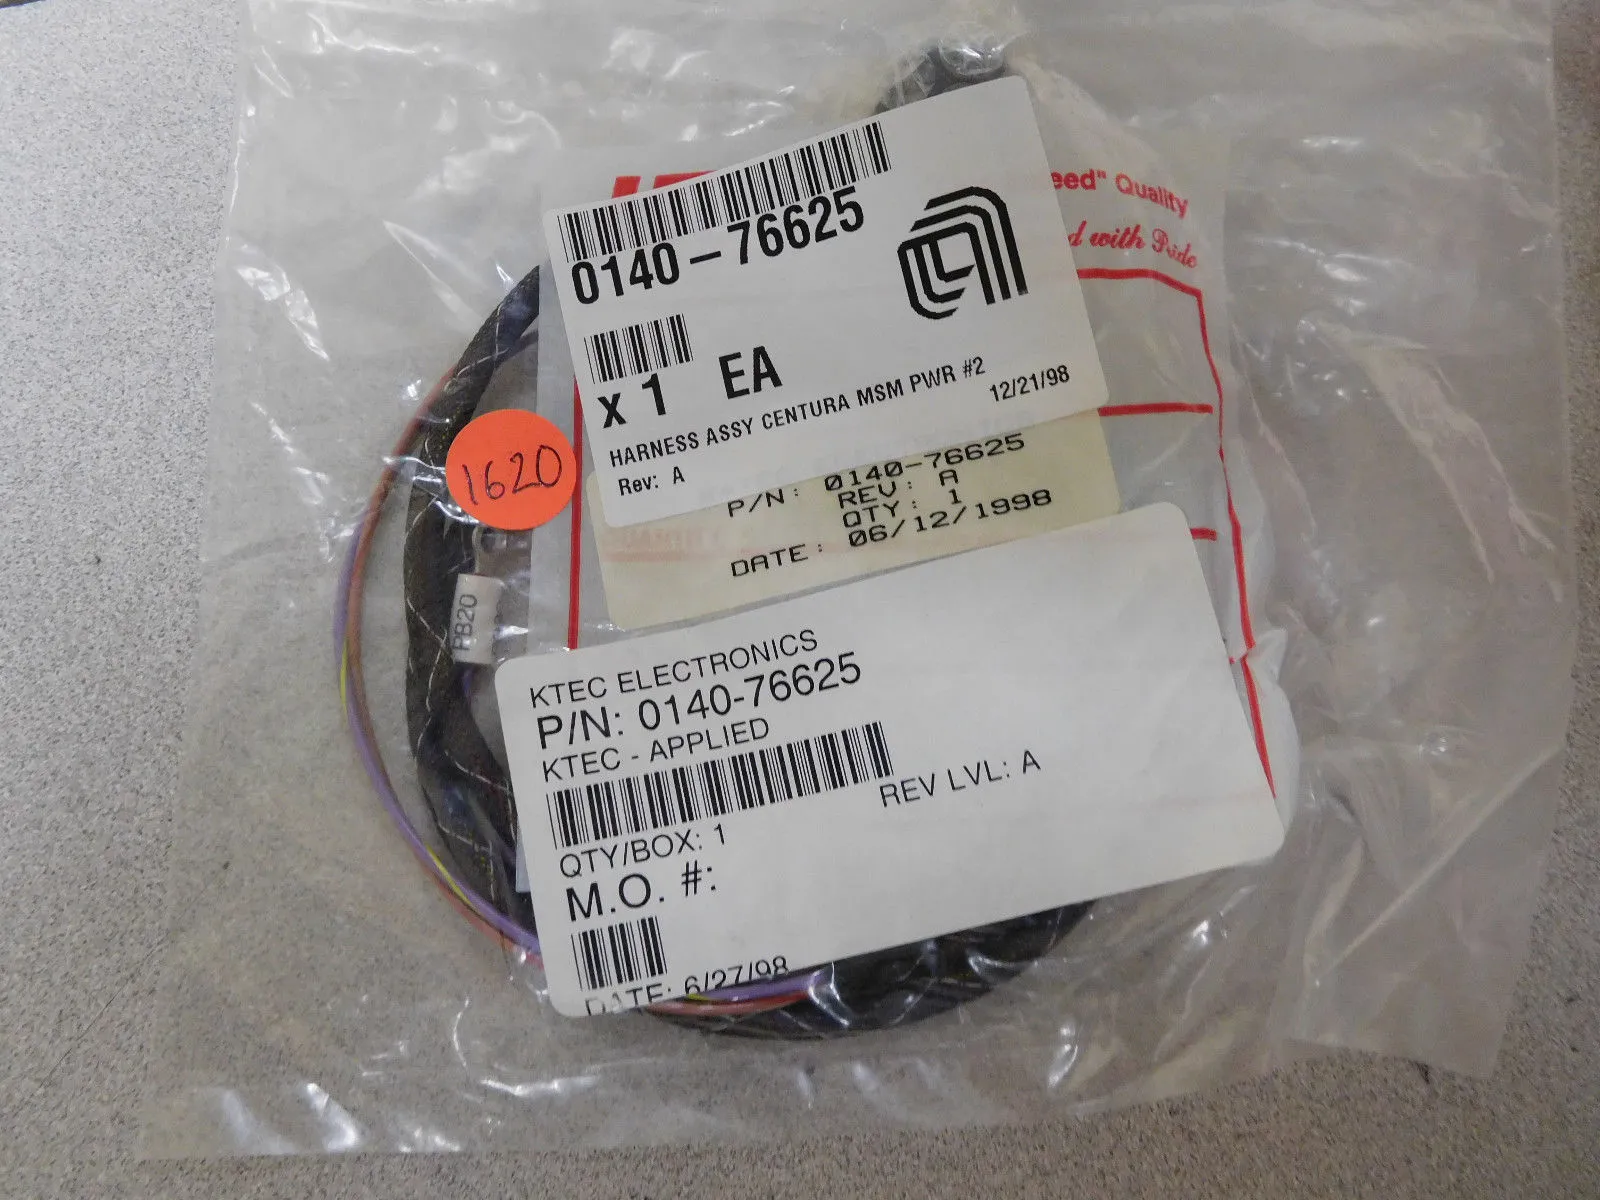 Details about   141-0501// AMAT APPLIED 0140-76625 HARNESS ASSY CENTURA MSM PWR #2 NEW 